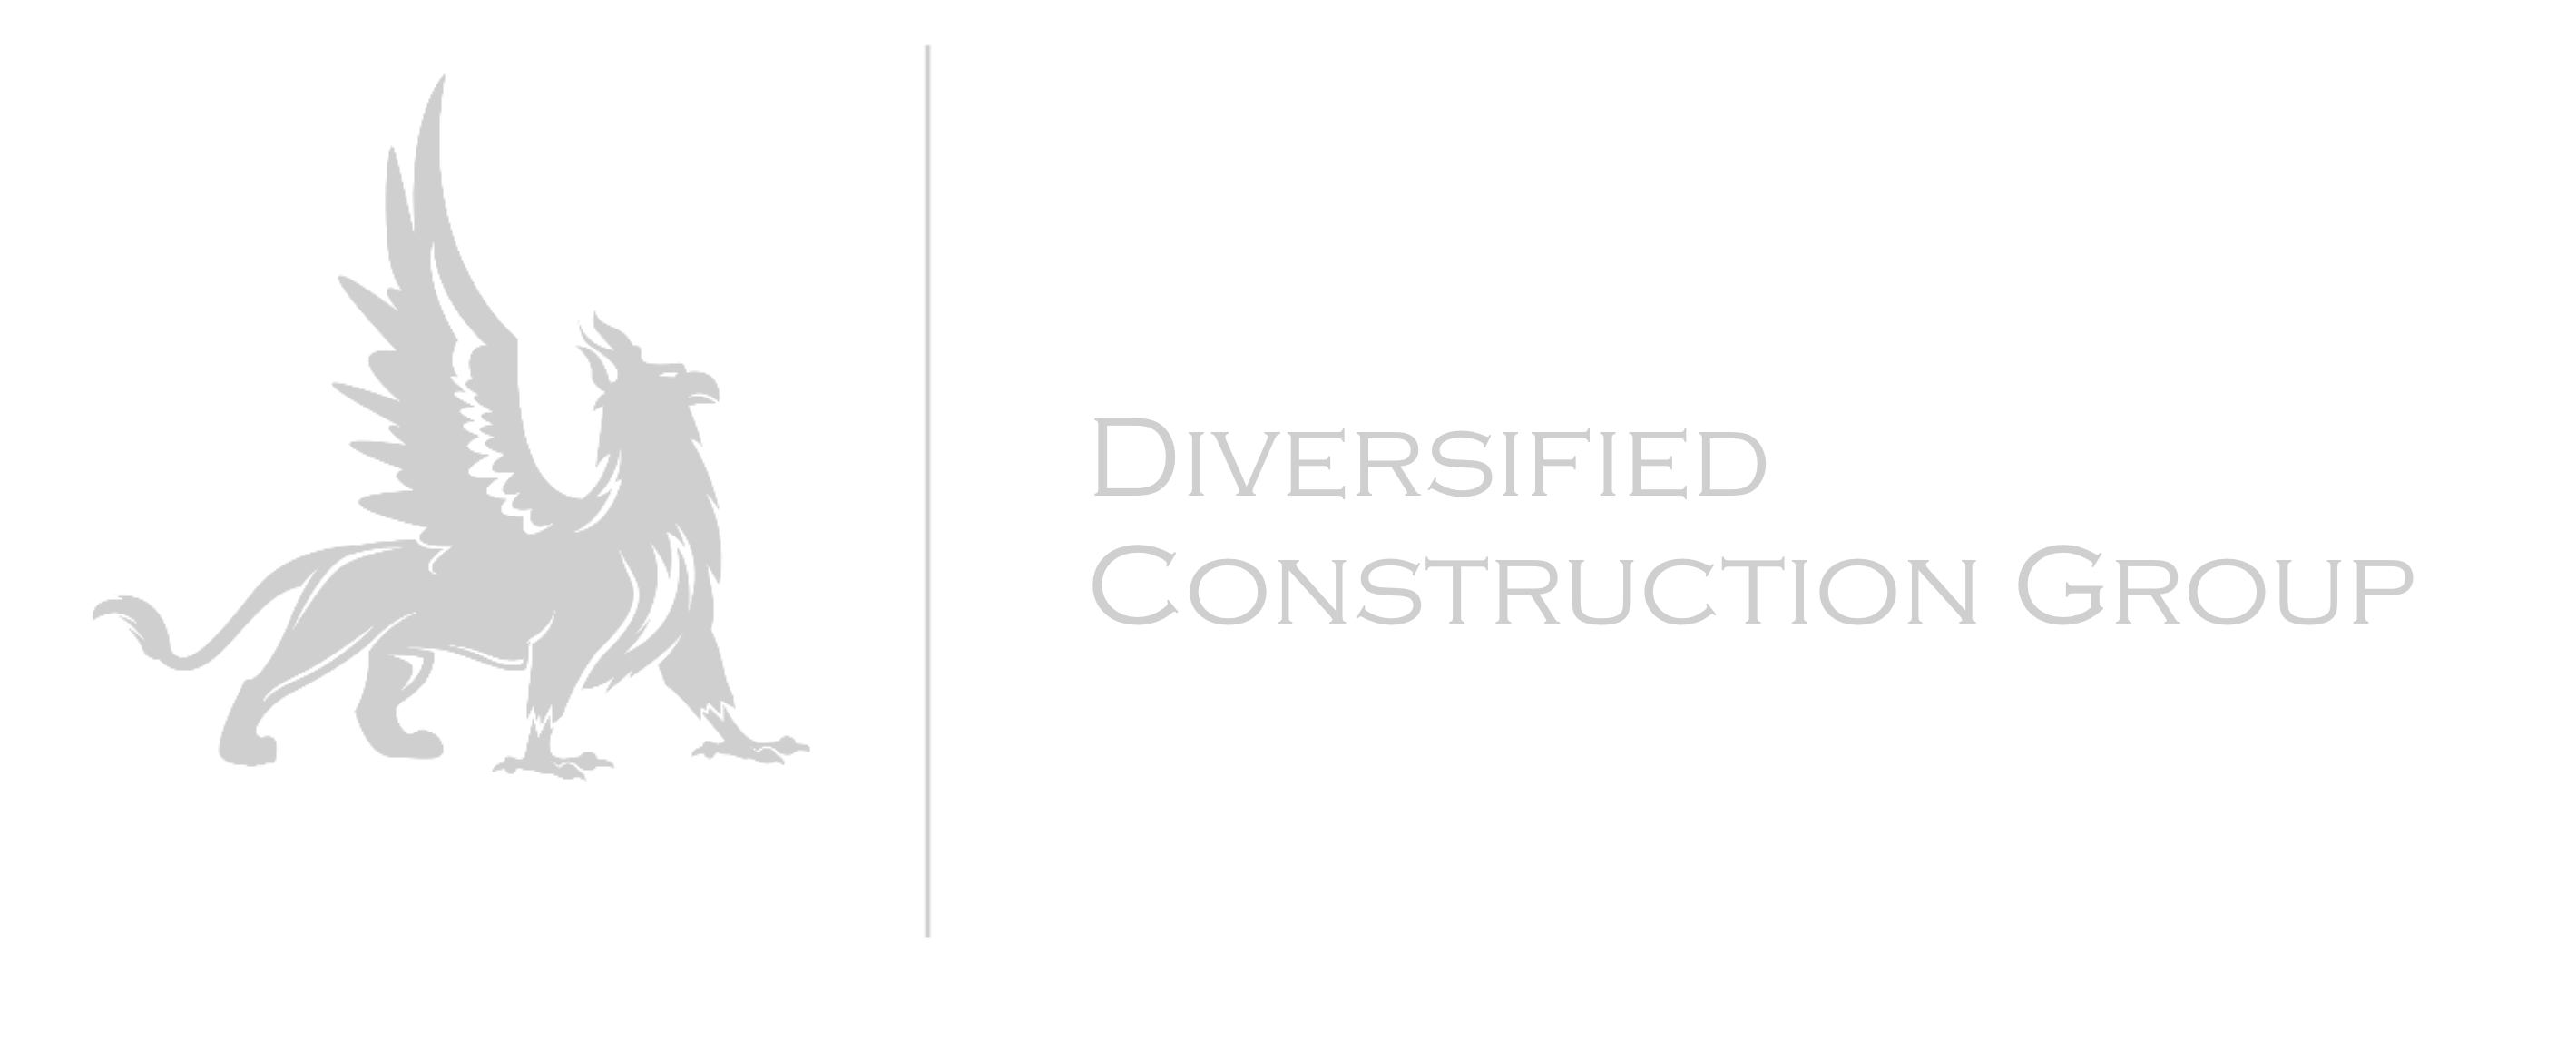 Diversified Construction Group